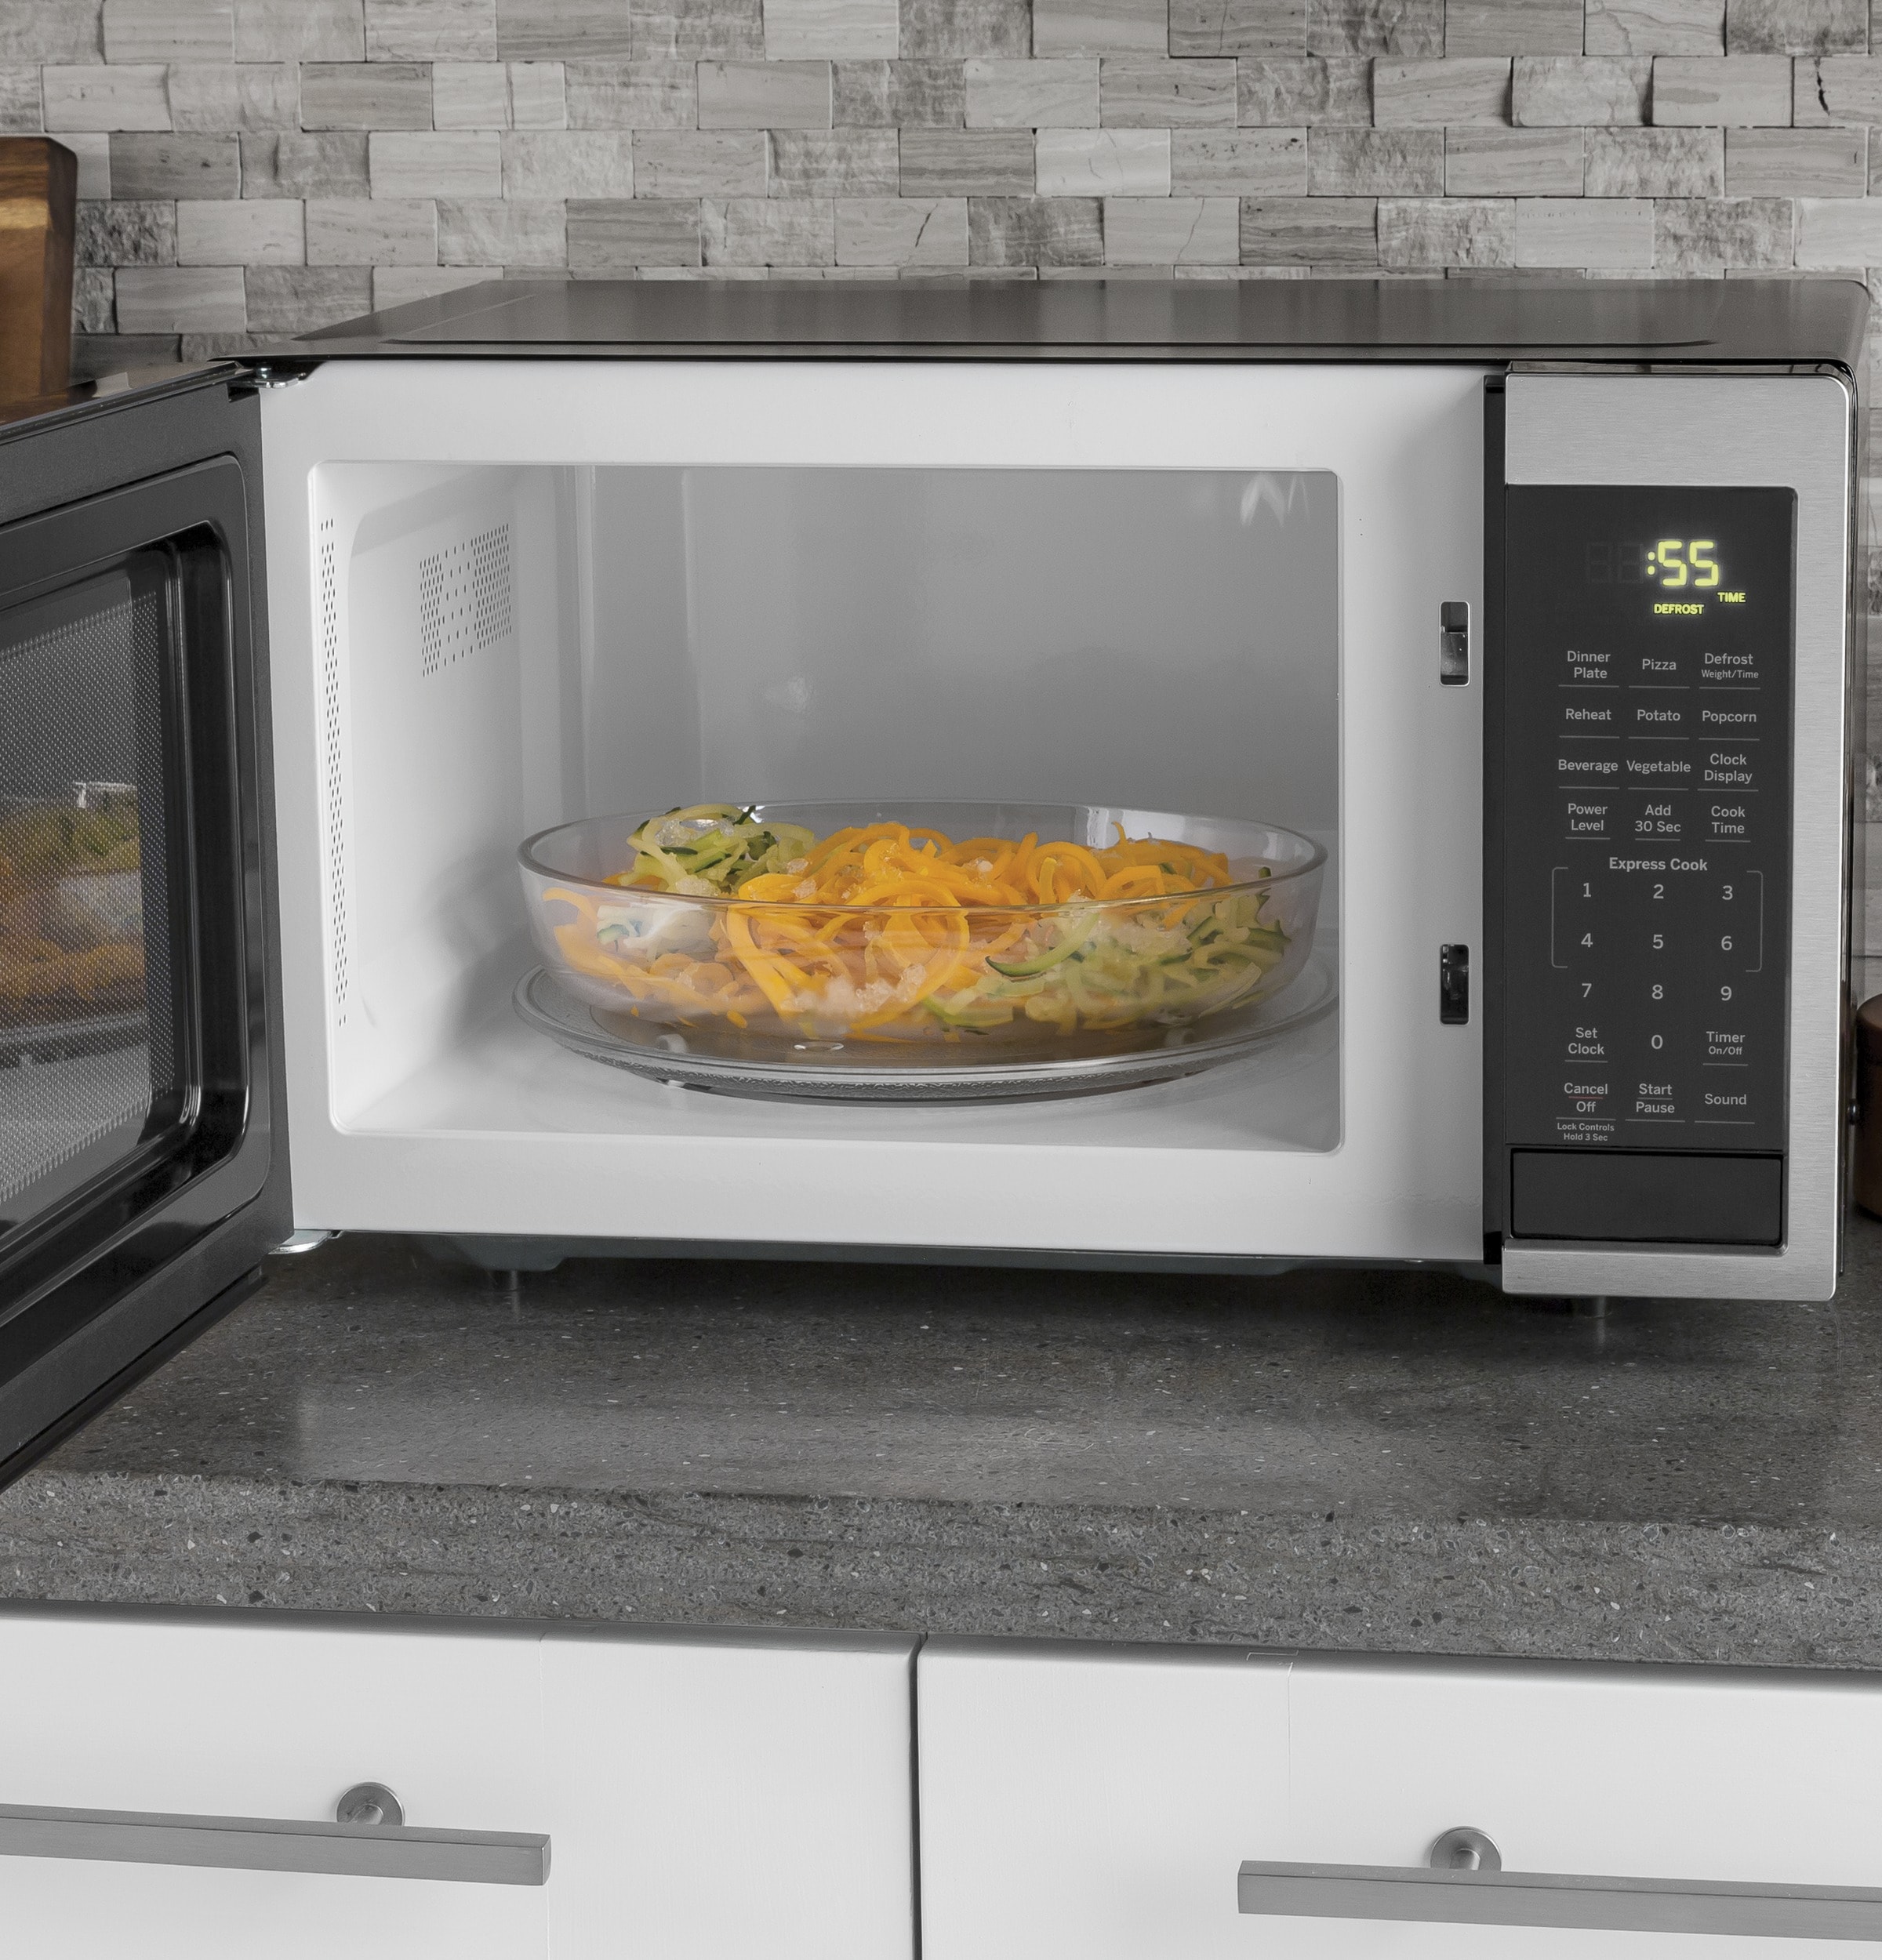 0.9 Cu. Ft. Stainless Steel Countertop Microwave Oven